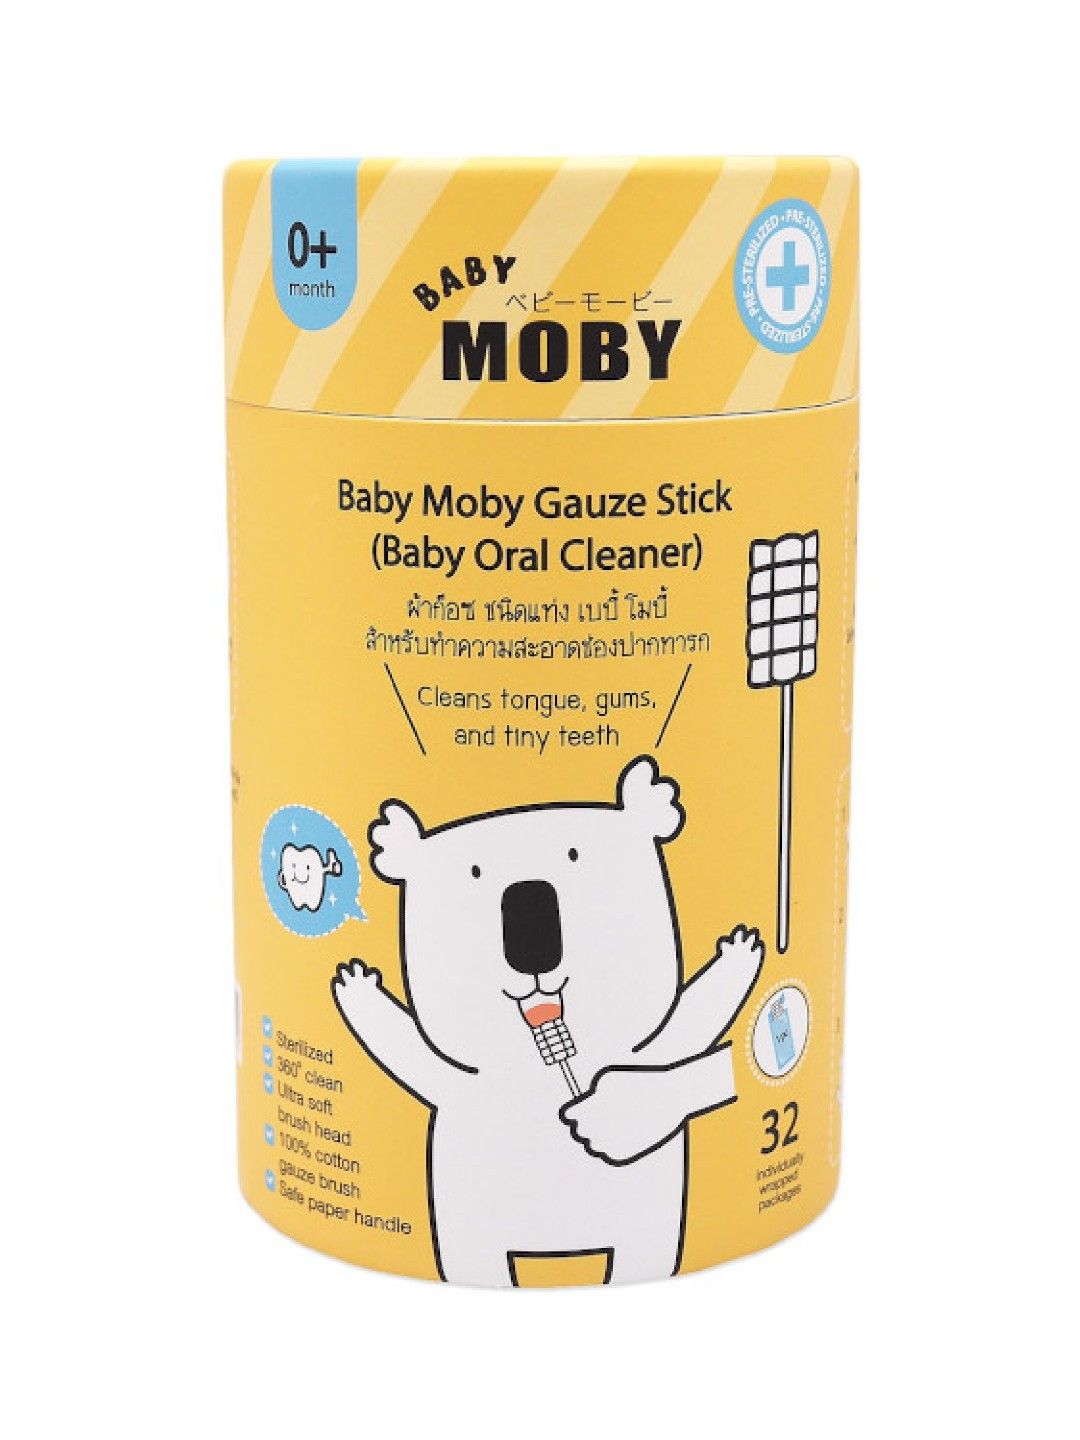 Baby Moby Gauze Stick (Baby Oral Cleaner) (No Color- Image 1)